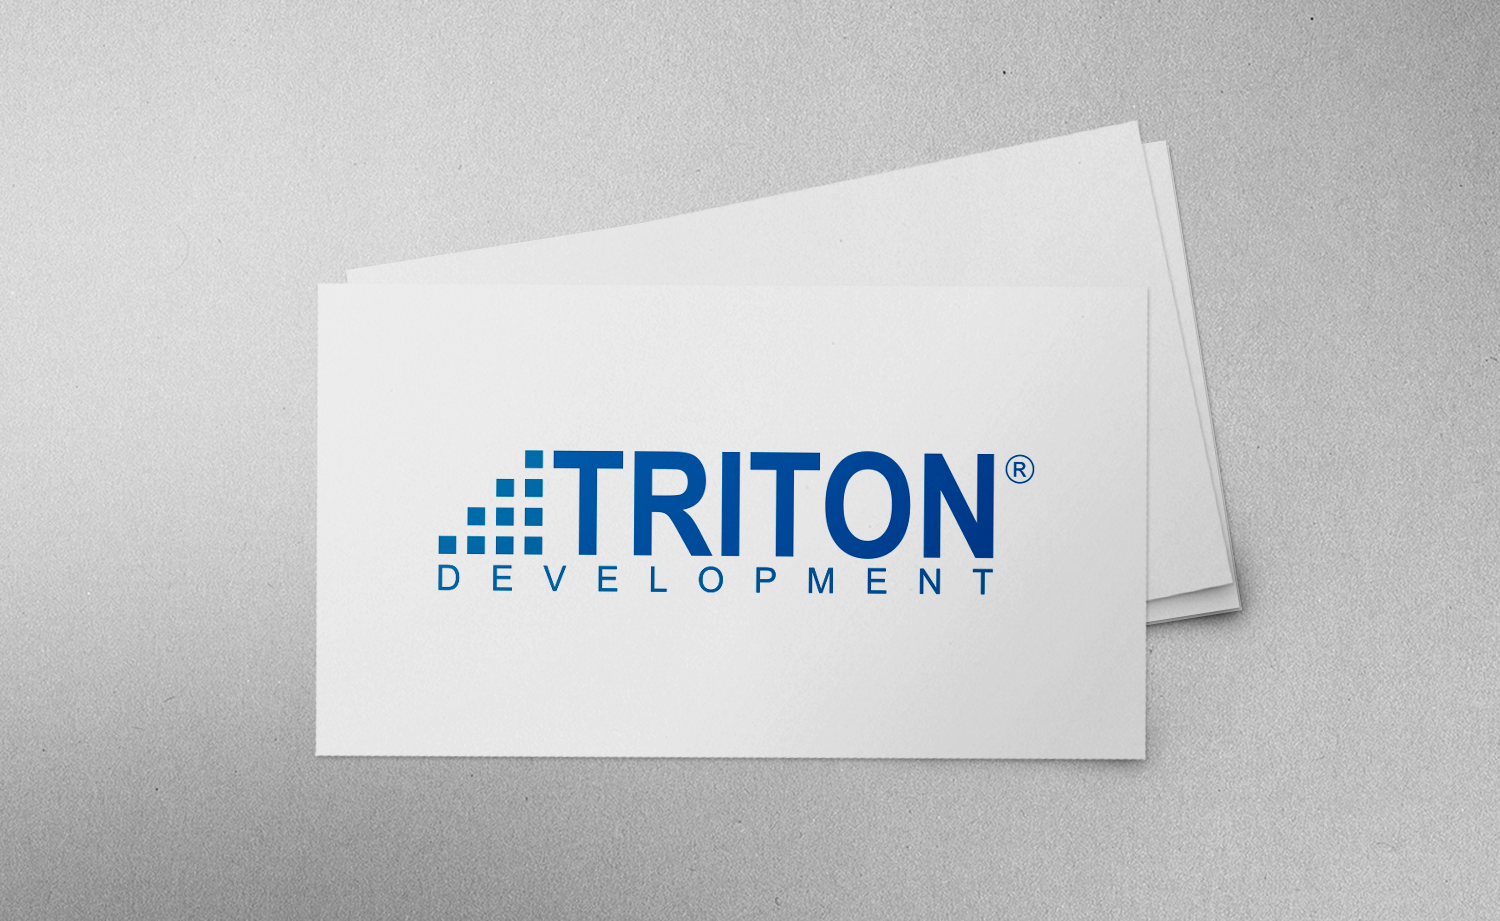 Triton Development has become one of our clients